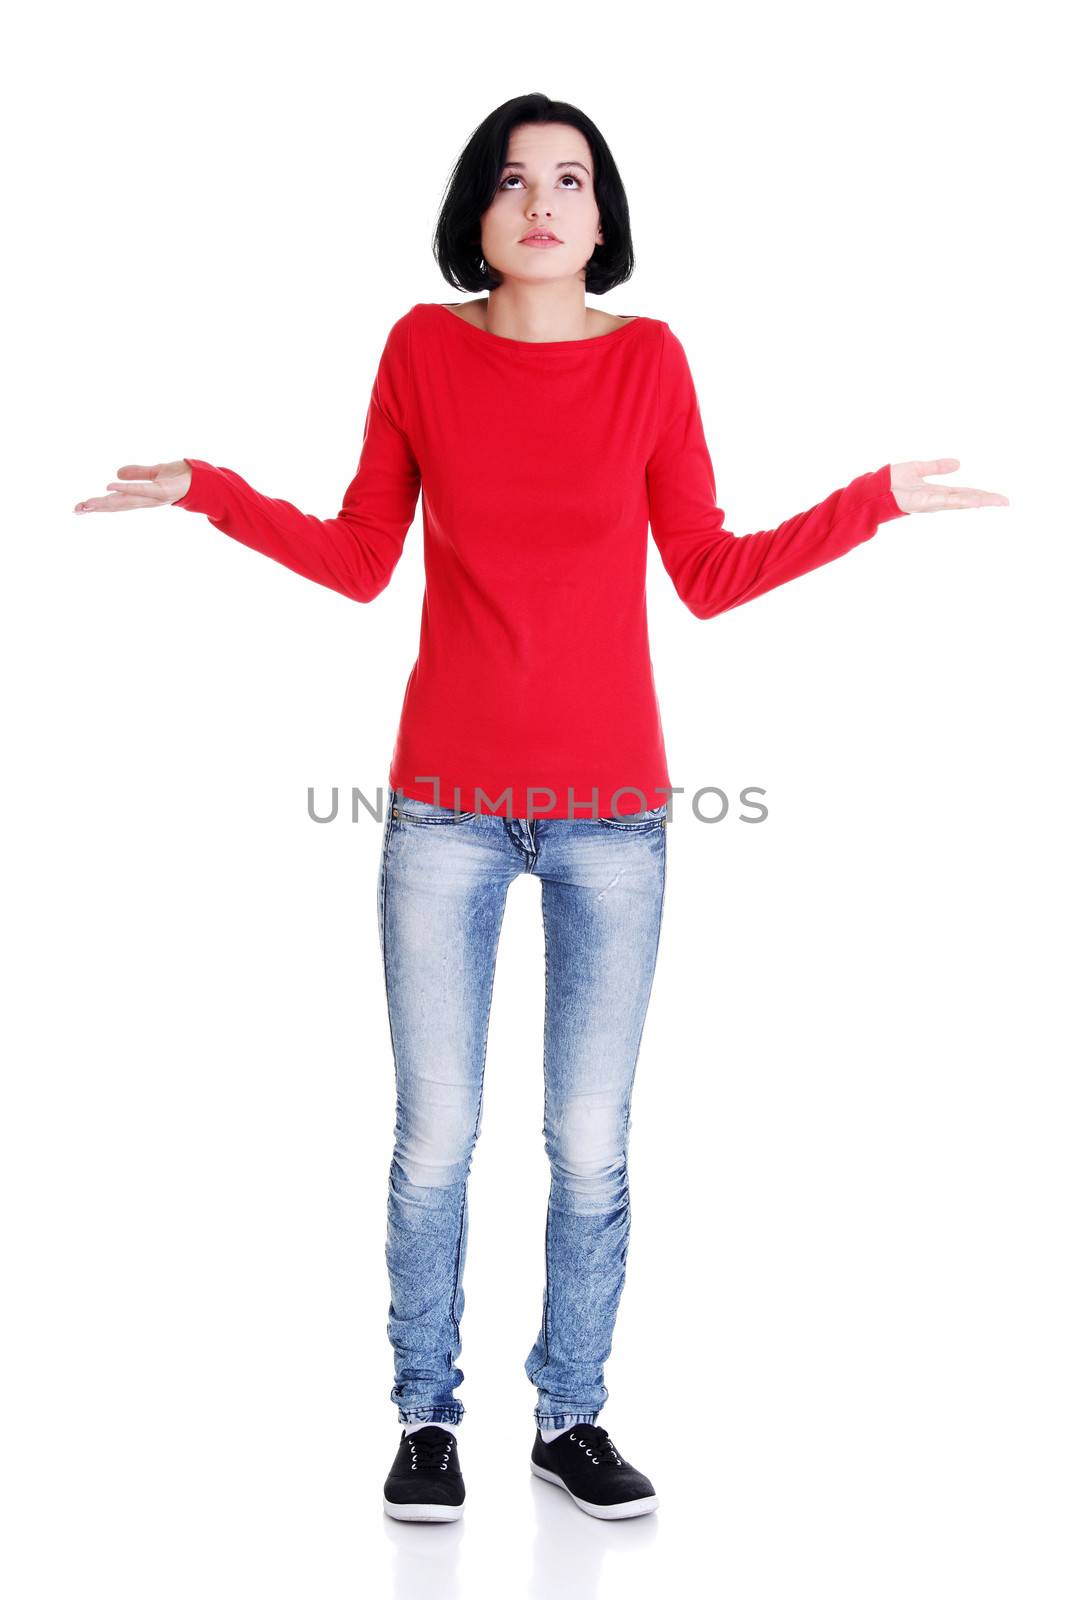 Young female gesturing do not know sign ,against white background